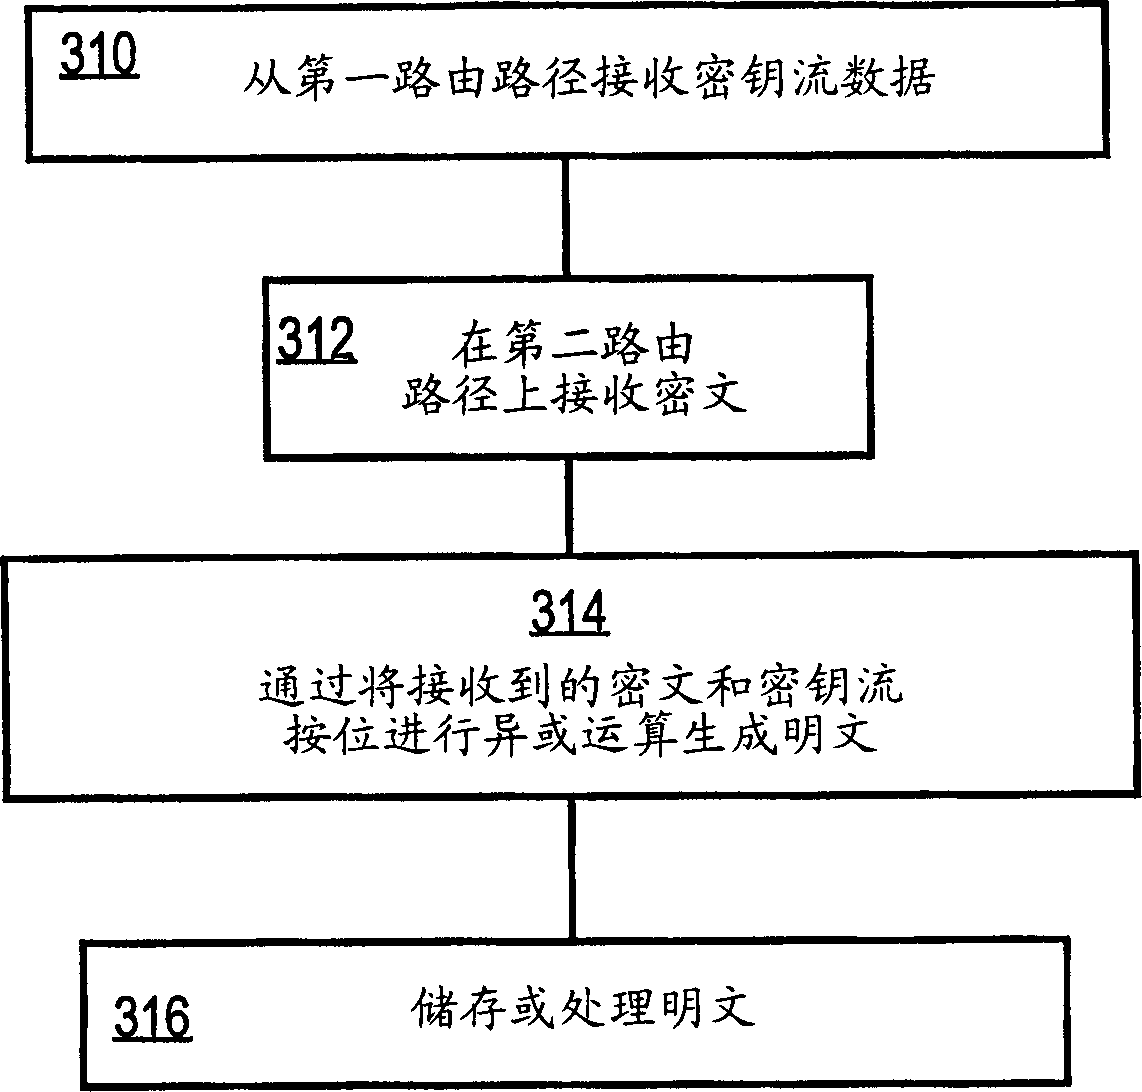 Method and system for securely storing and transmitting data by applying a one-time pad